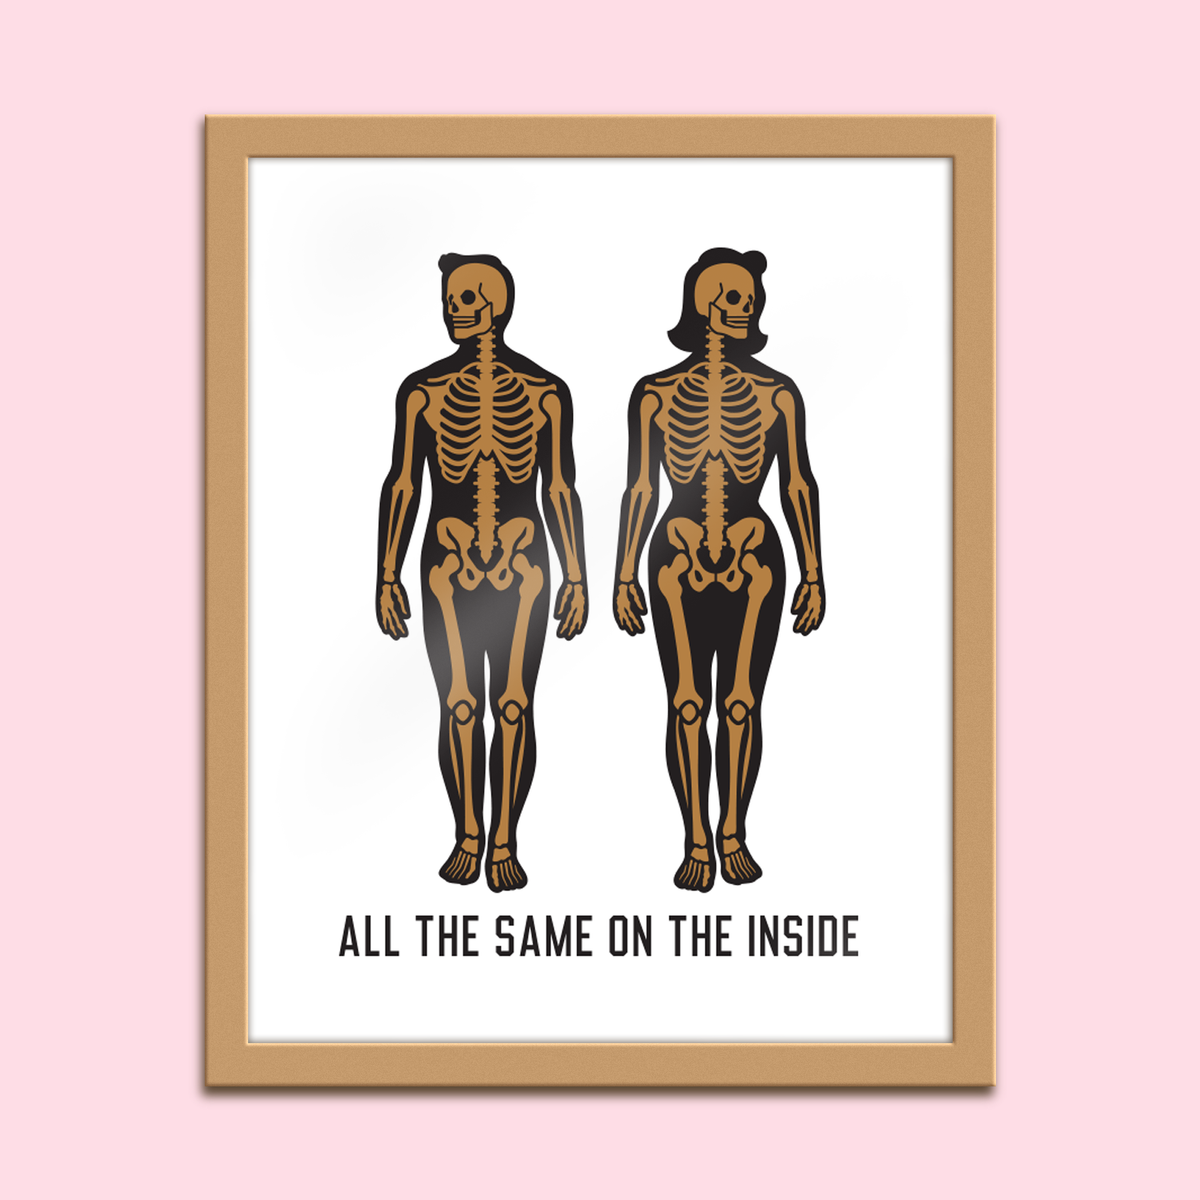 All The Same On The Inside - Gold - 8x10